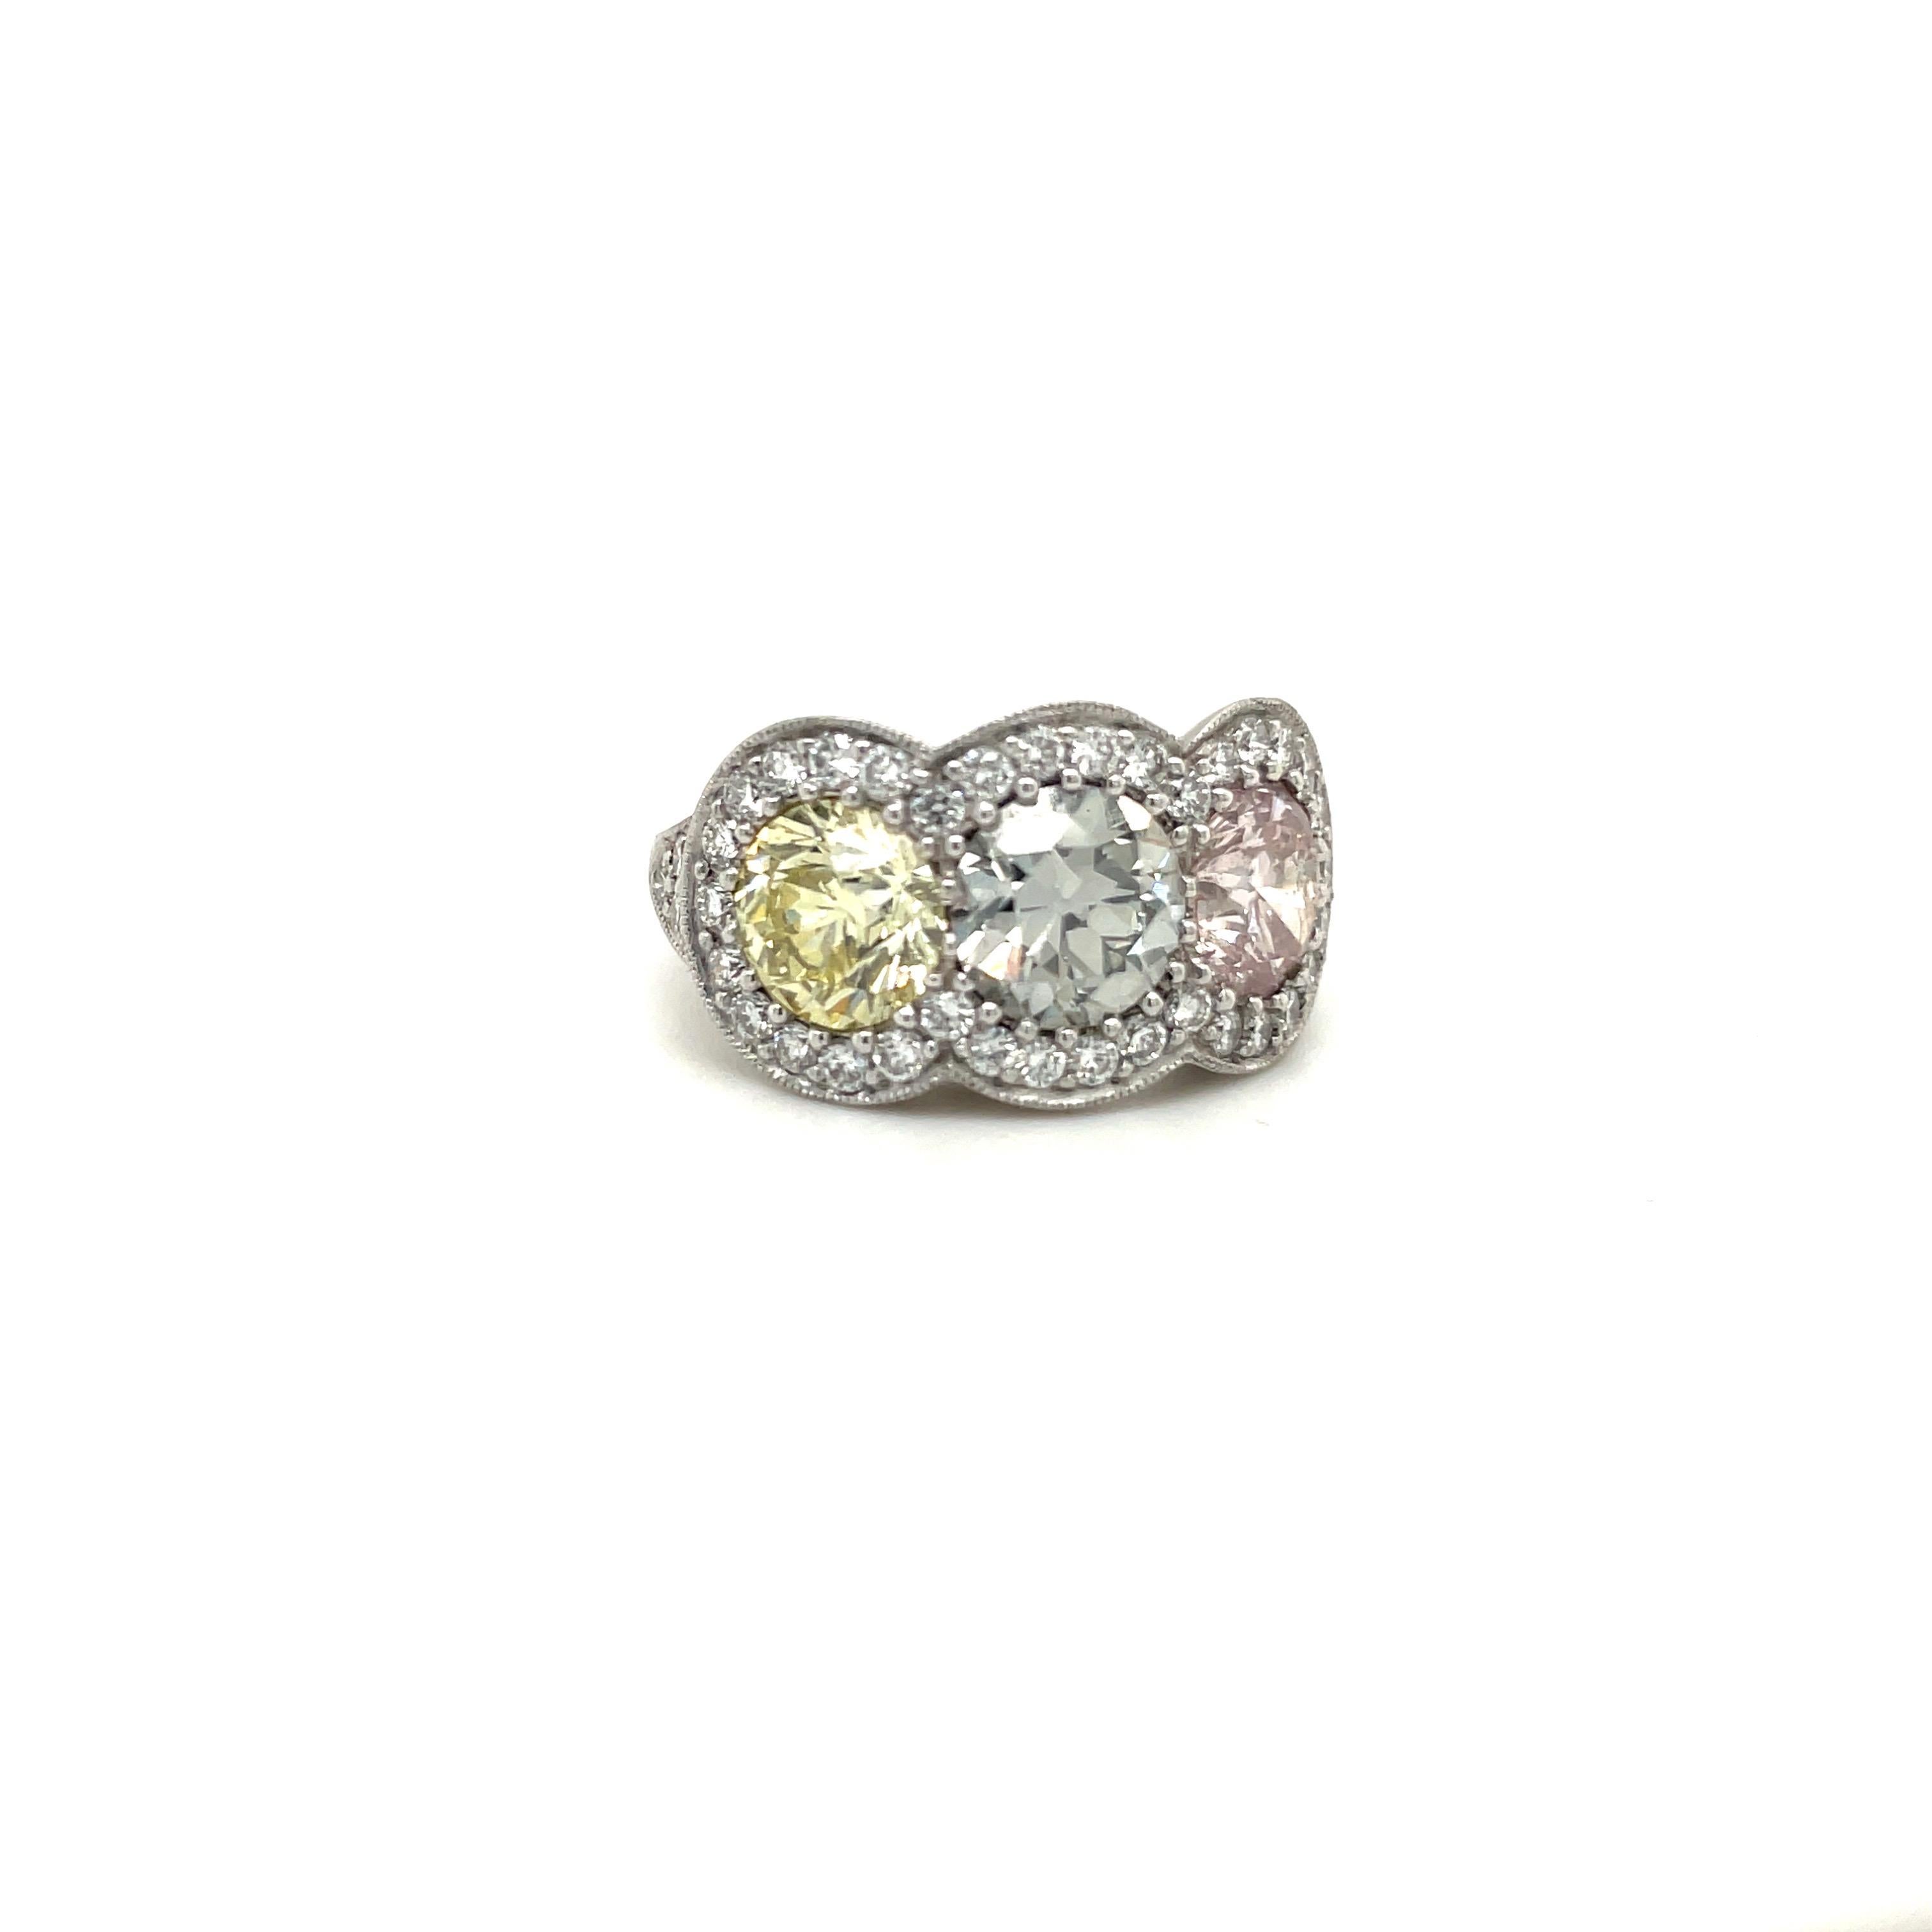 Cellini Plat Fancy Colored 1.43Ct Pink 1.34Ct Yellow 1.53Ct Grey Diamond Ring In New Condition For Sale In New York, NY